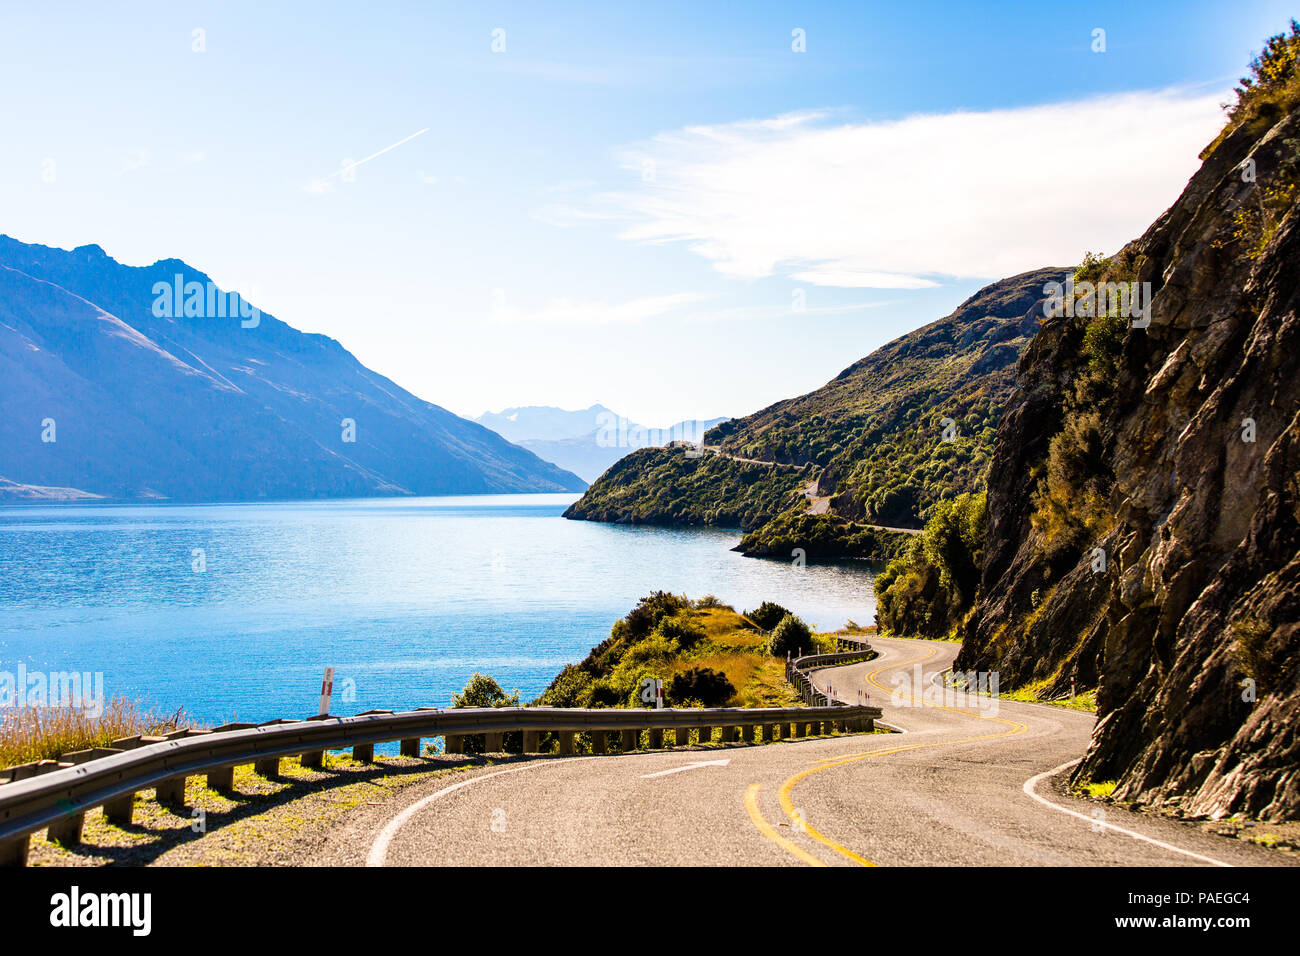 Endless Travels On A Beautiful, Mountain-Winding Road In Queenstown, New Zealand Stock Photo